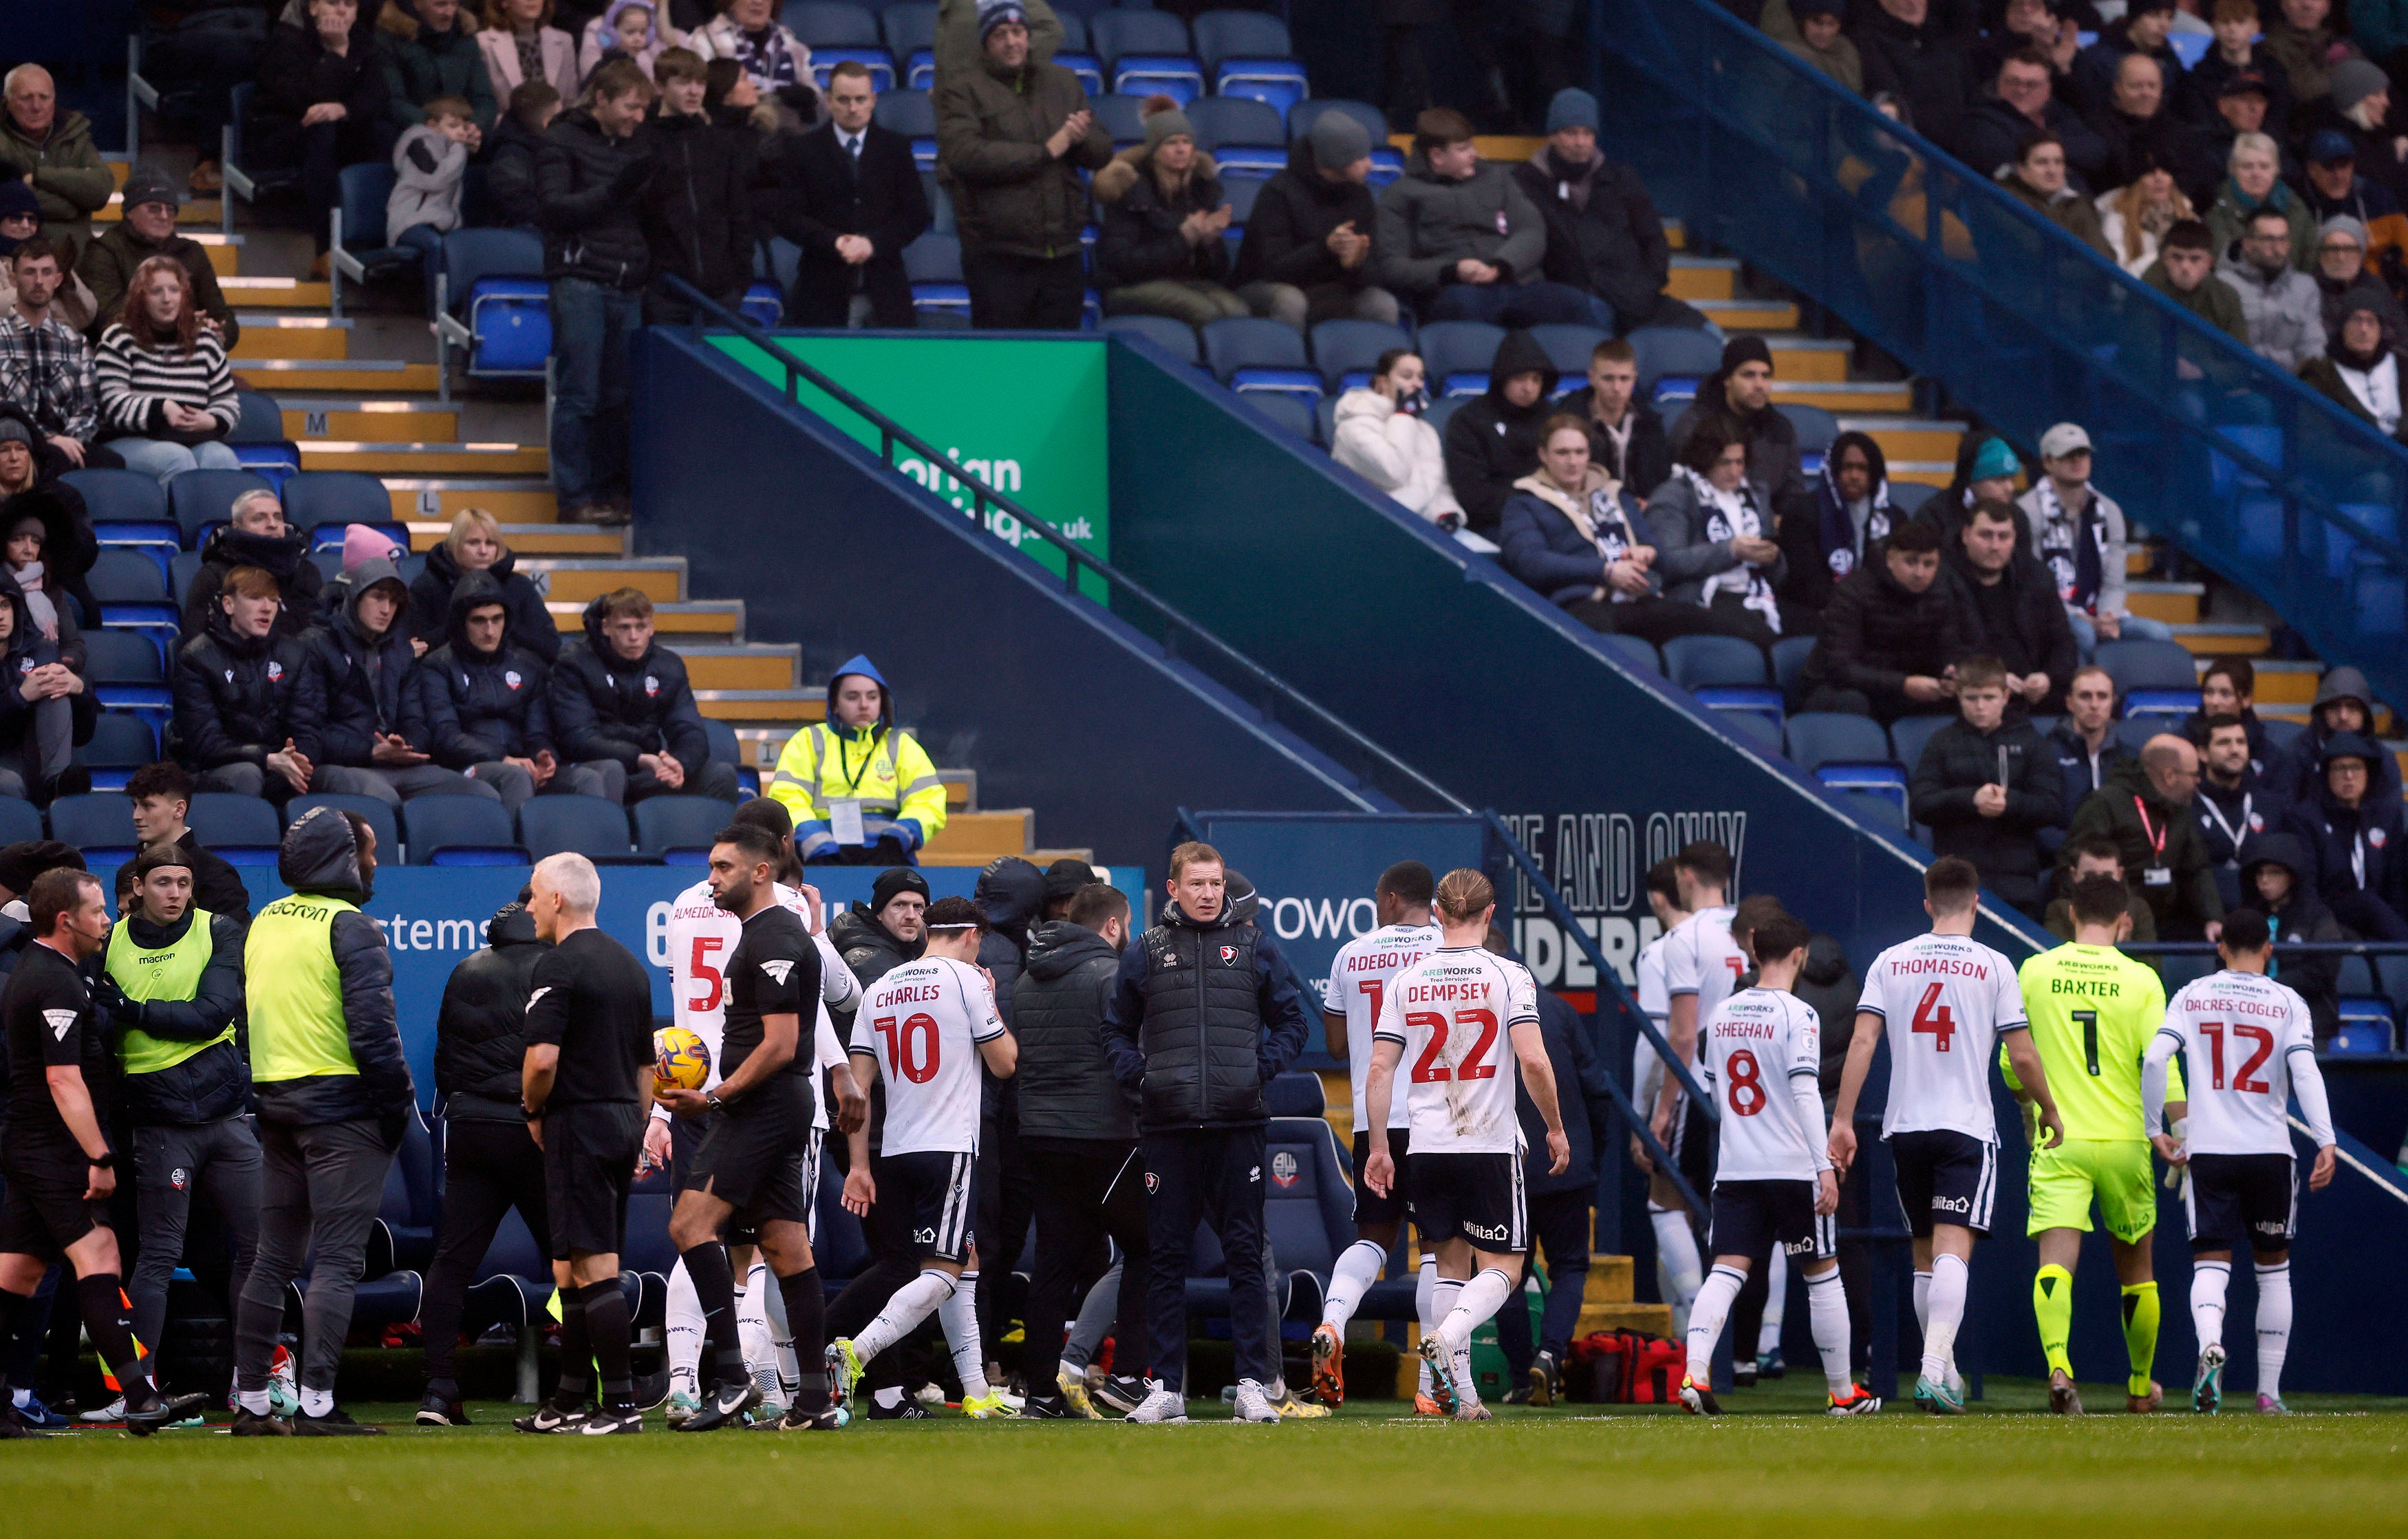 The game between Bolton and Cheltenham was called off after the supporter collapsed and needed medical help